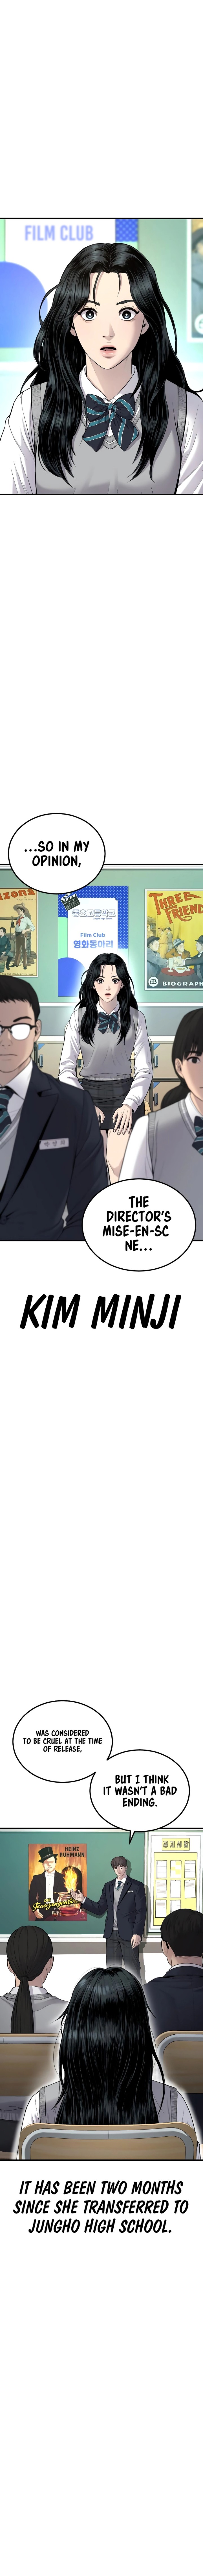 manager_kim_72_1